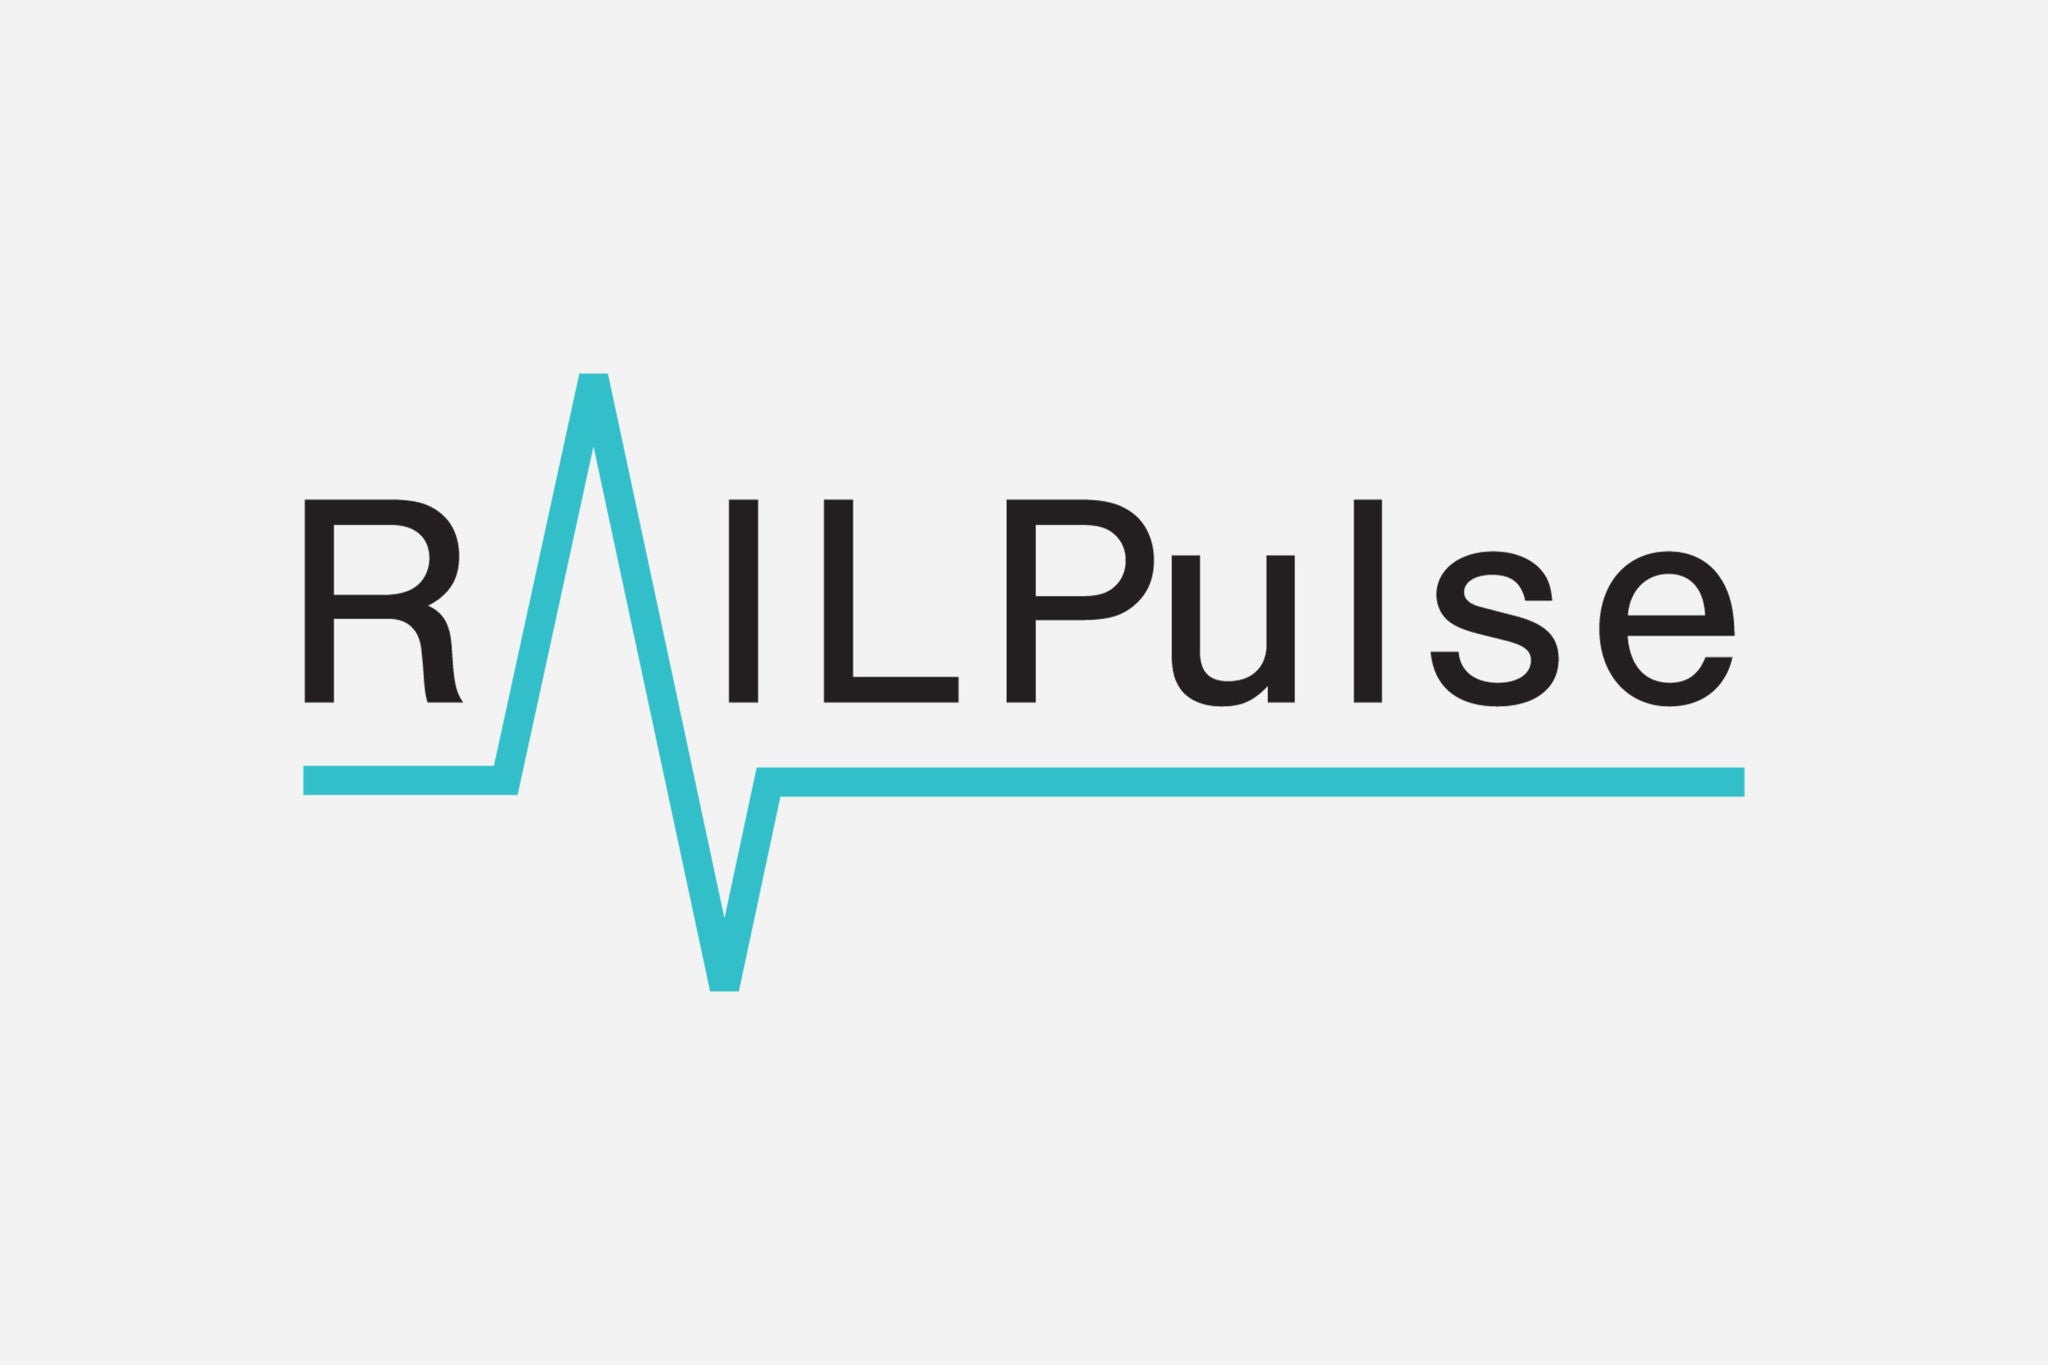 The railpulse logo in black with the A in teal and travelling under the rest of the logo like a heart beat monitor.